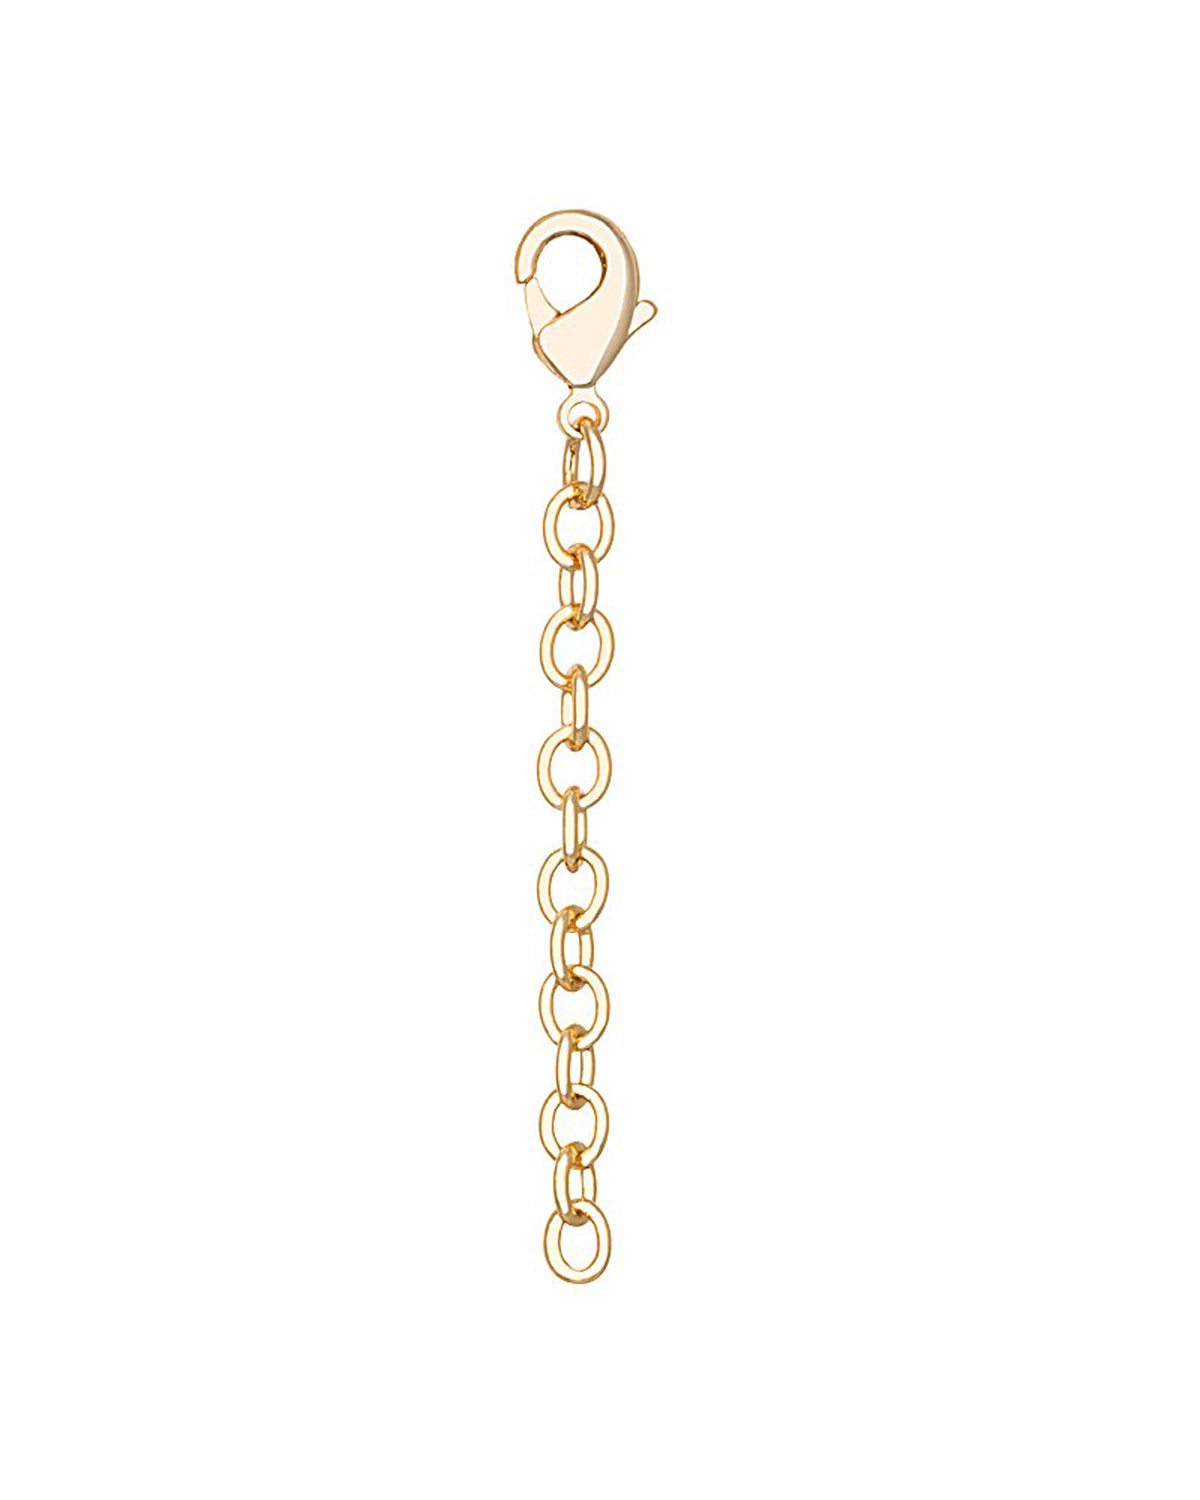 Kendra Scott 2" Lobster Claw Necklace Bracelet Extender in Gold Plated